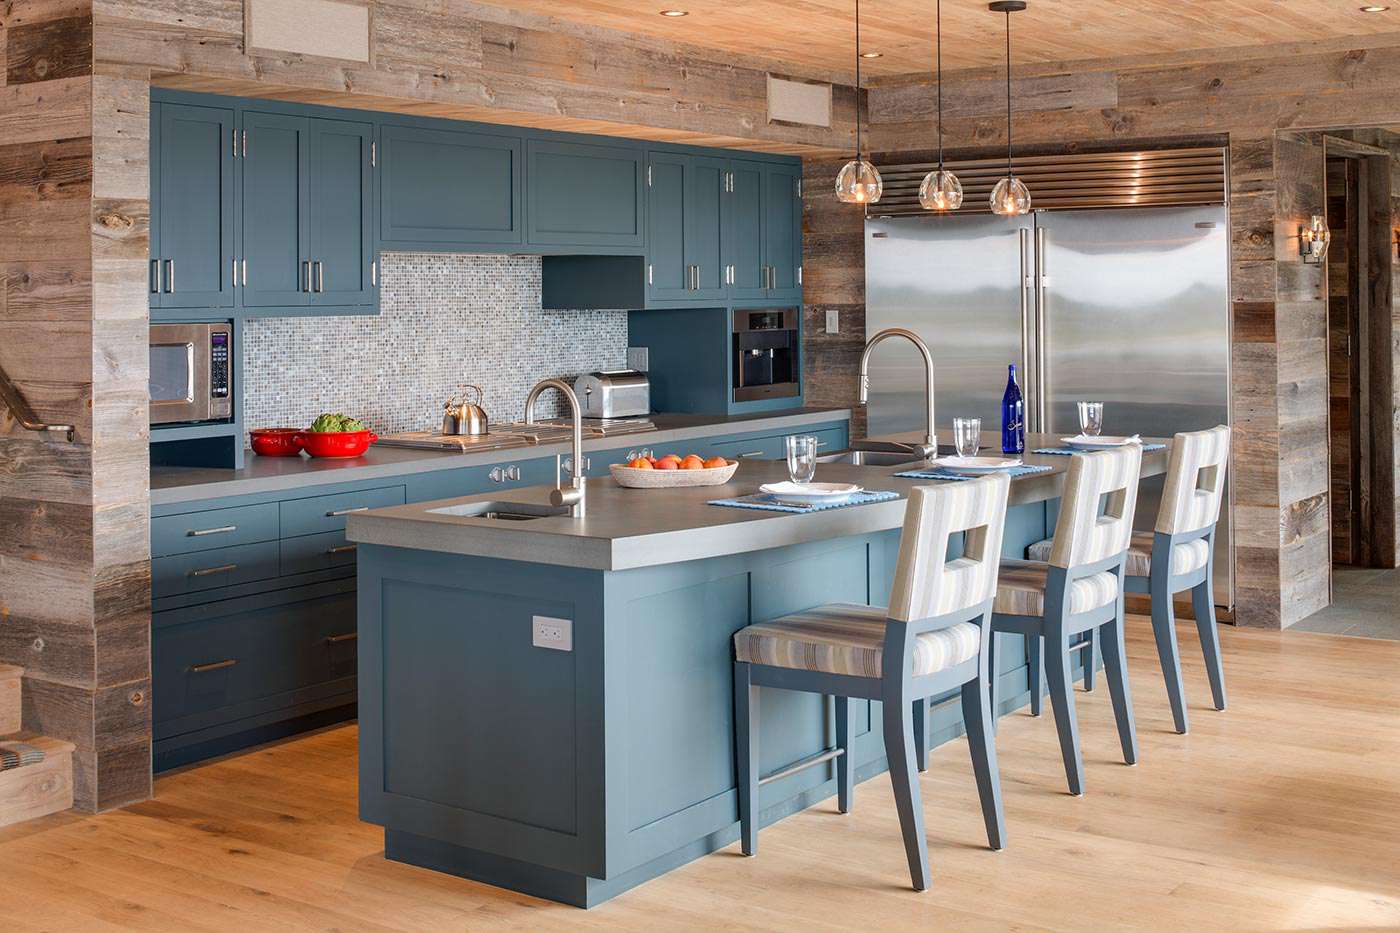 Rustic wood accents in country blue kitchen